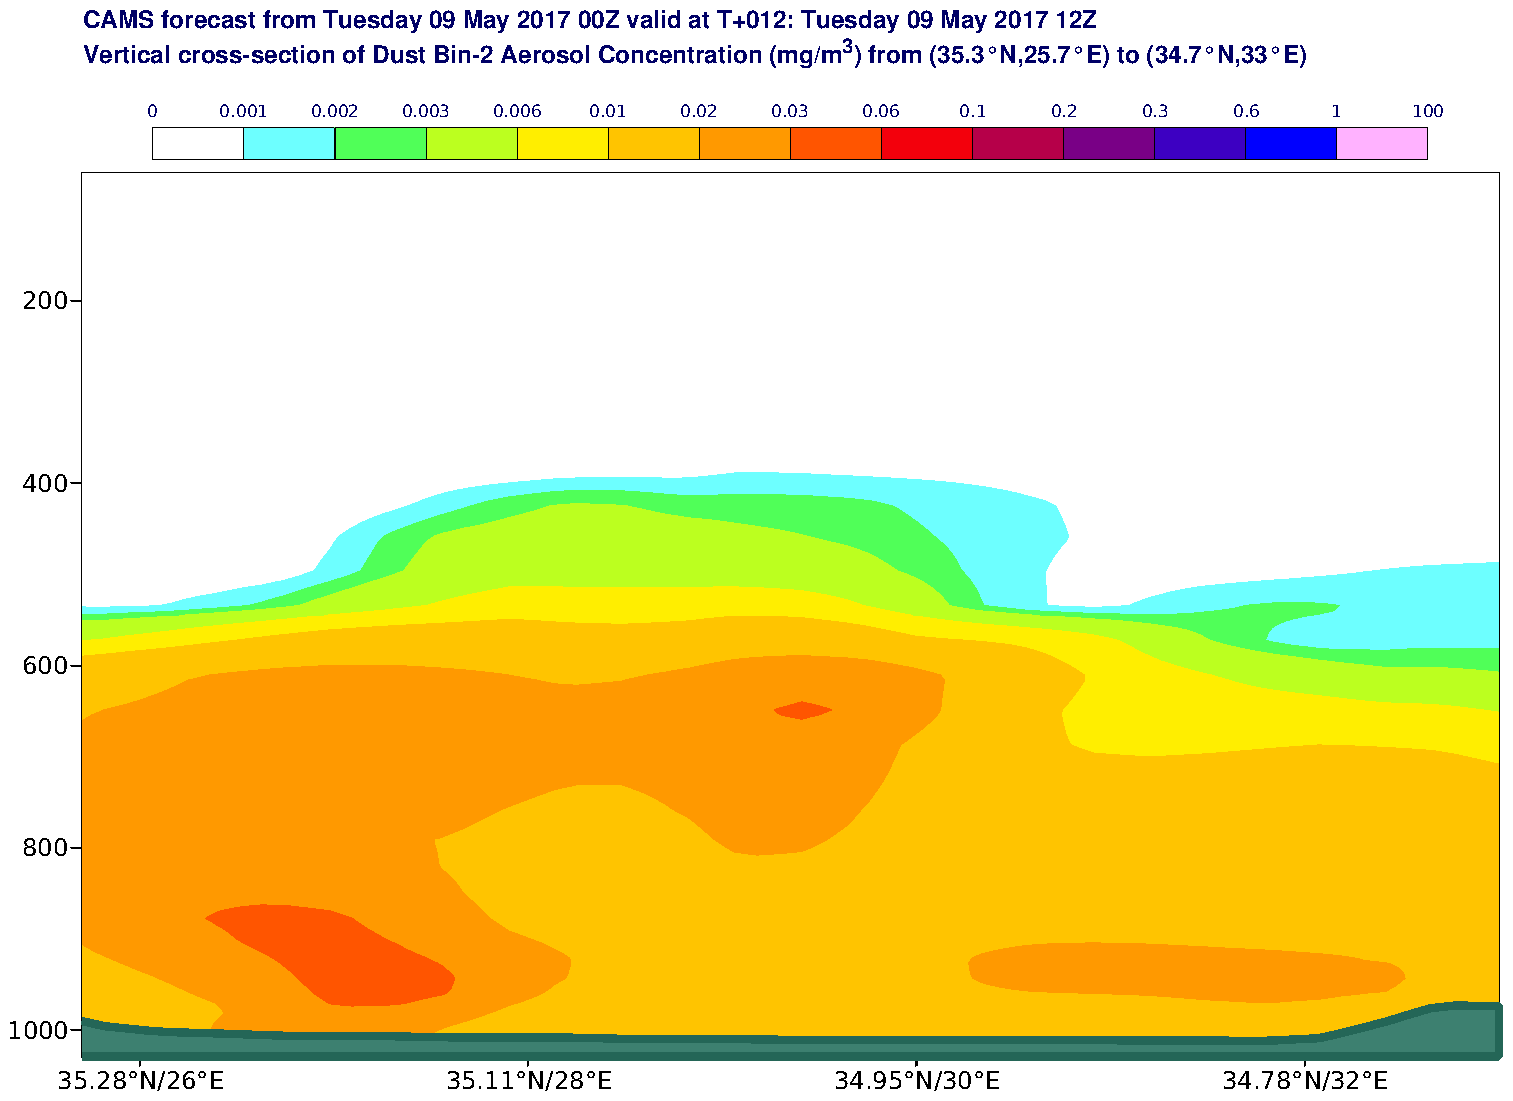 Vertical cross-section of Dust Bin-2 Aerosol Concentration (mg/m3) valid at T12 - 2017-05-09 12:00